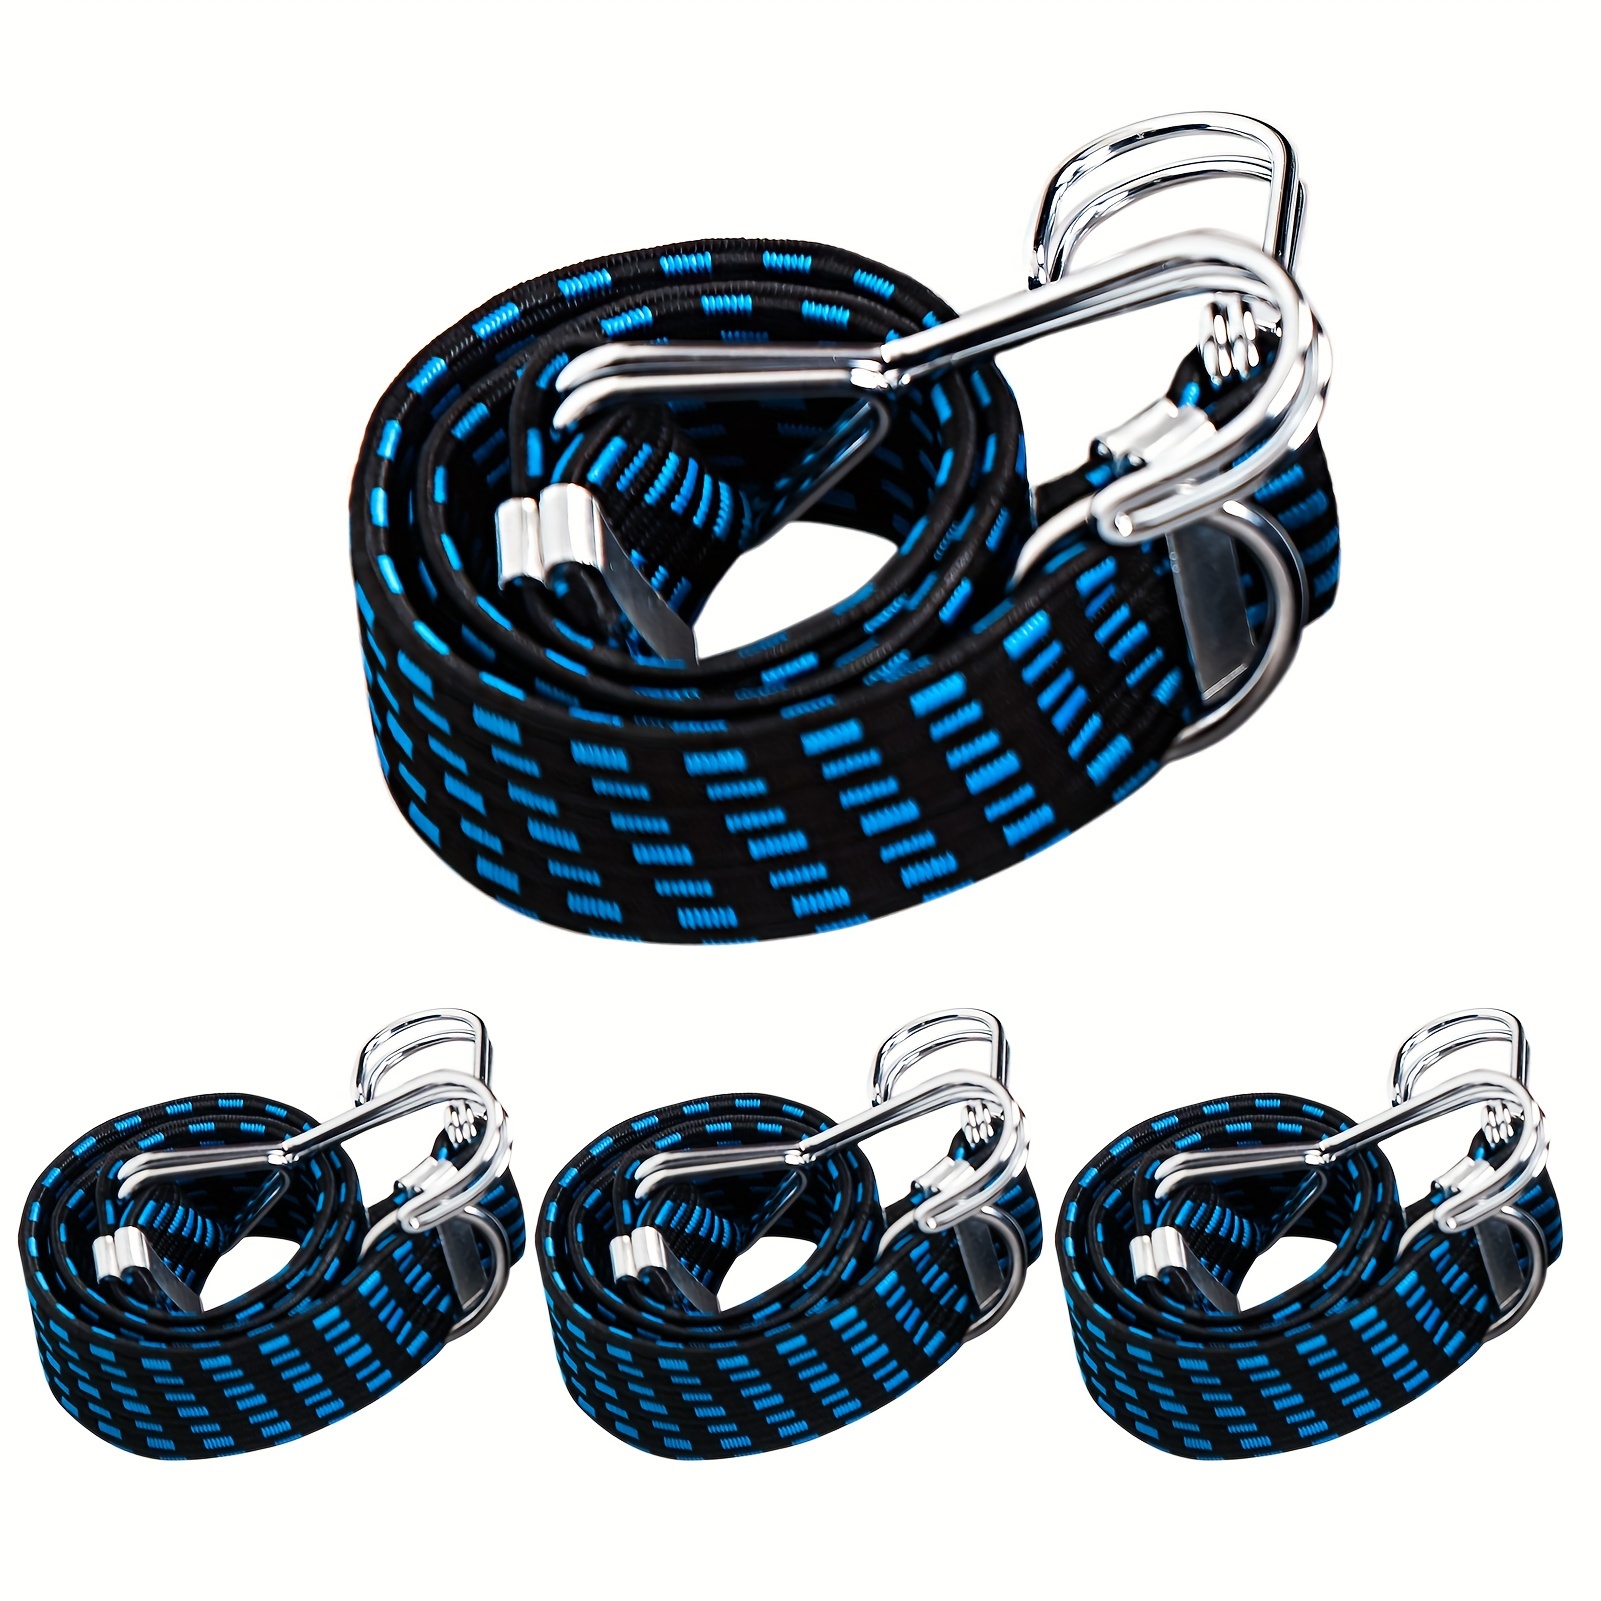 TWO 24 BUNGEE CORD HEAVY DUTY CARABINER STRONG HOOK STRAP ROPE CAR ROOF  LUGGAGE